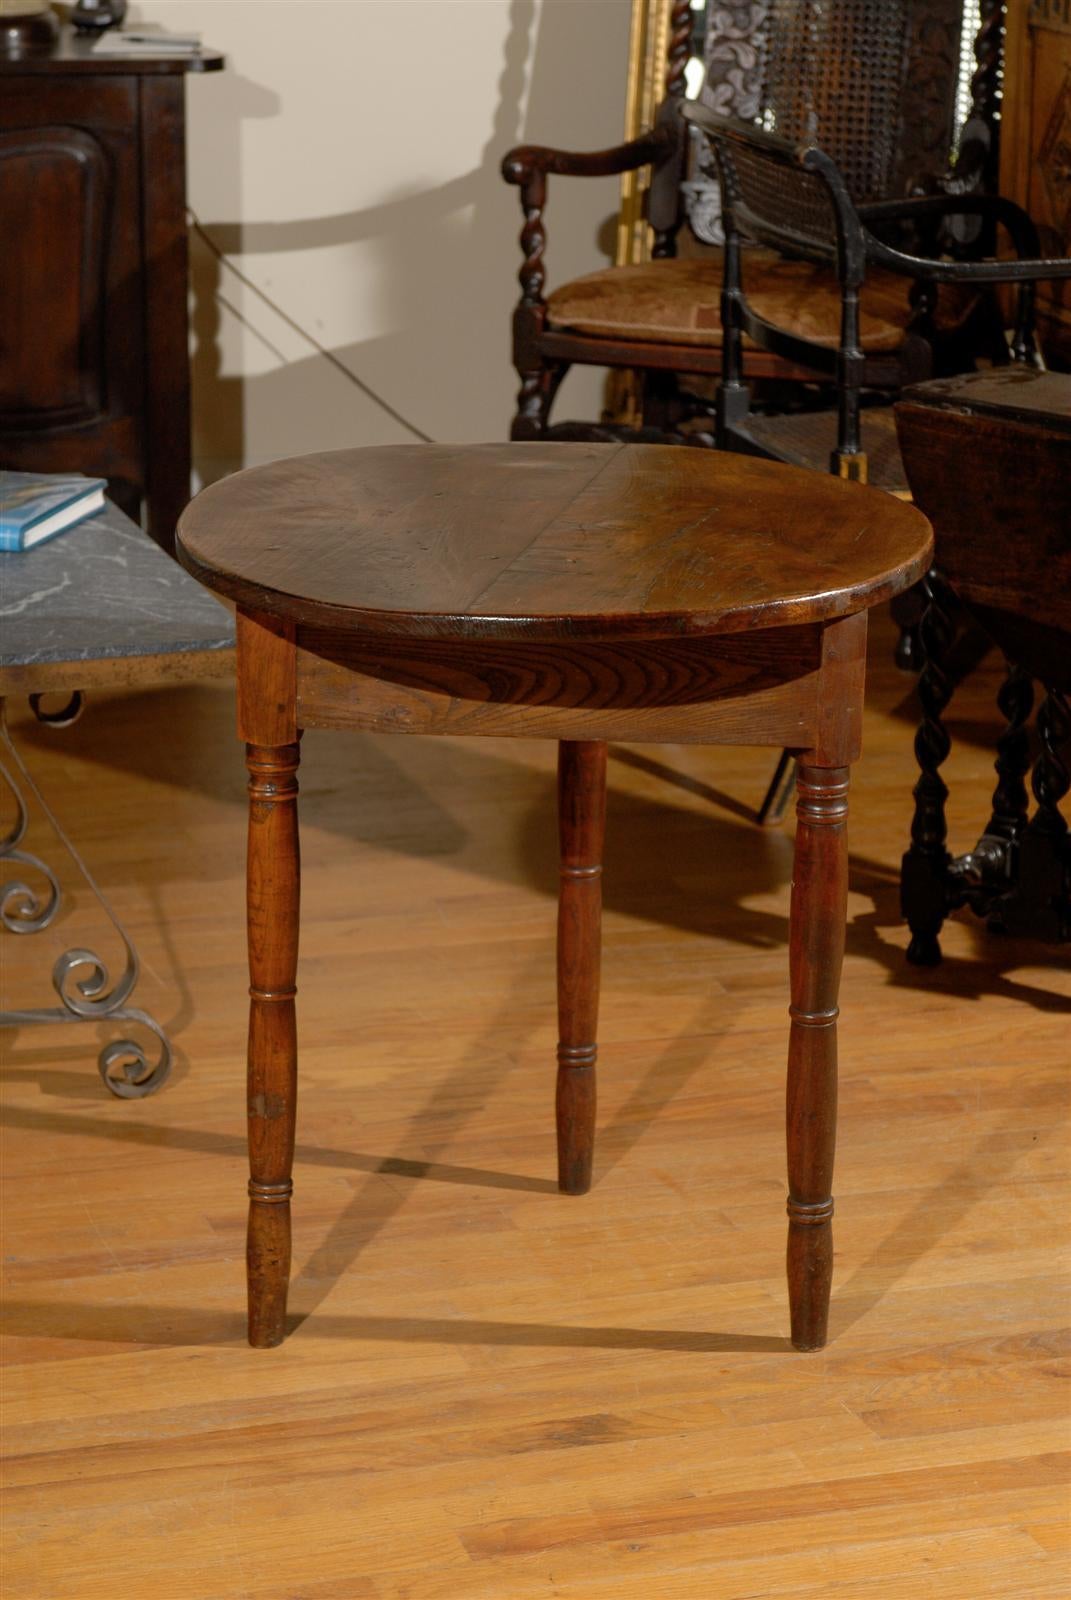 This English cricket table is made of Elm wood in circa 1850.  Cricket tables were always built with three legs for making it easier to balance when  brought out to view cricket games.  This particular table is unique with its turned legs.  Most